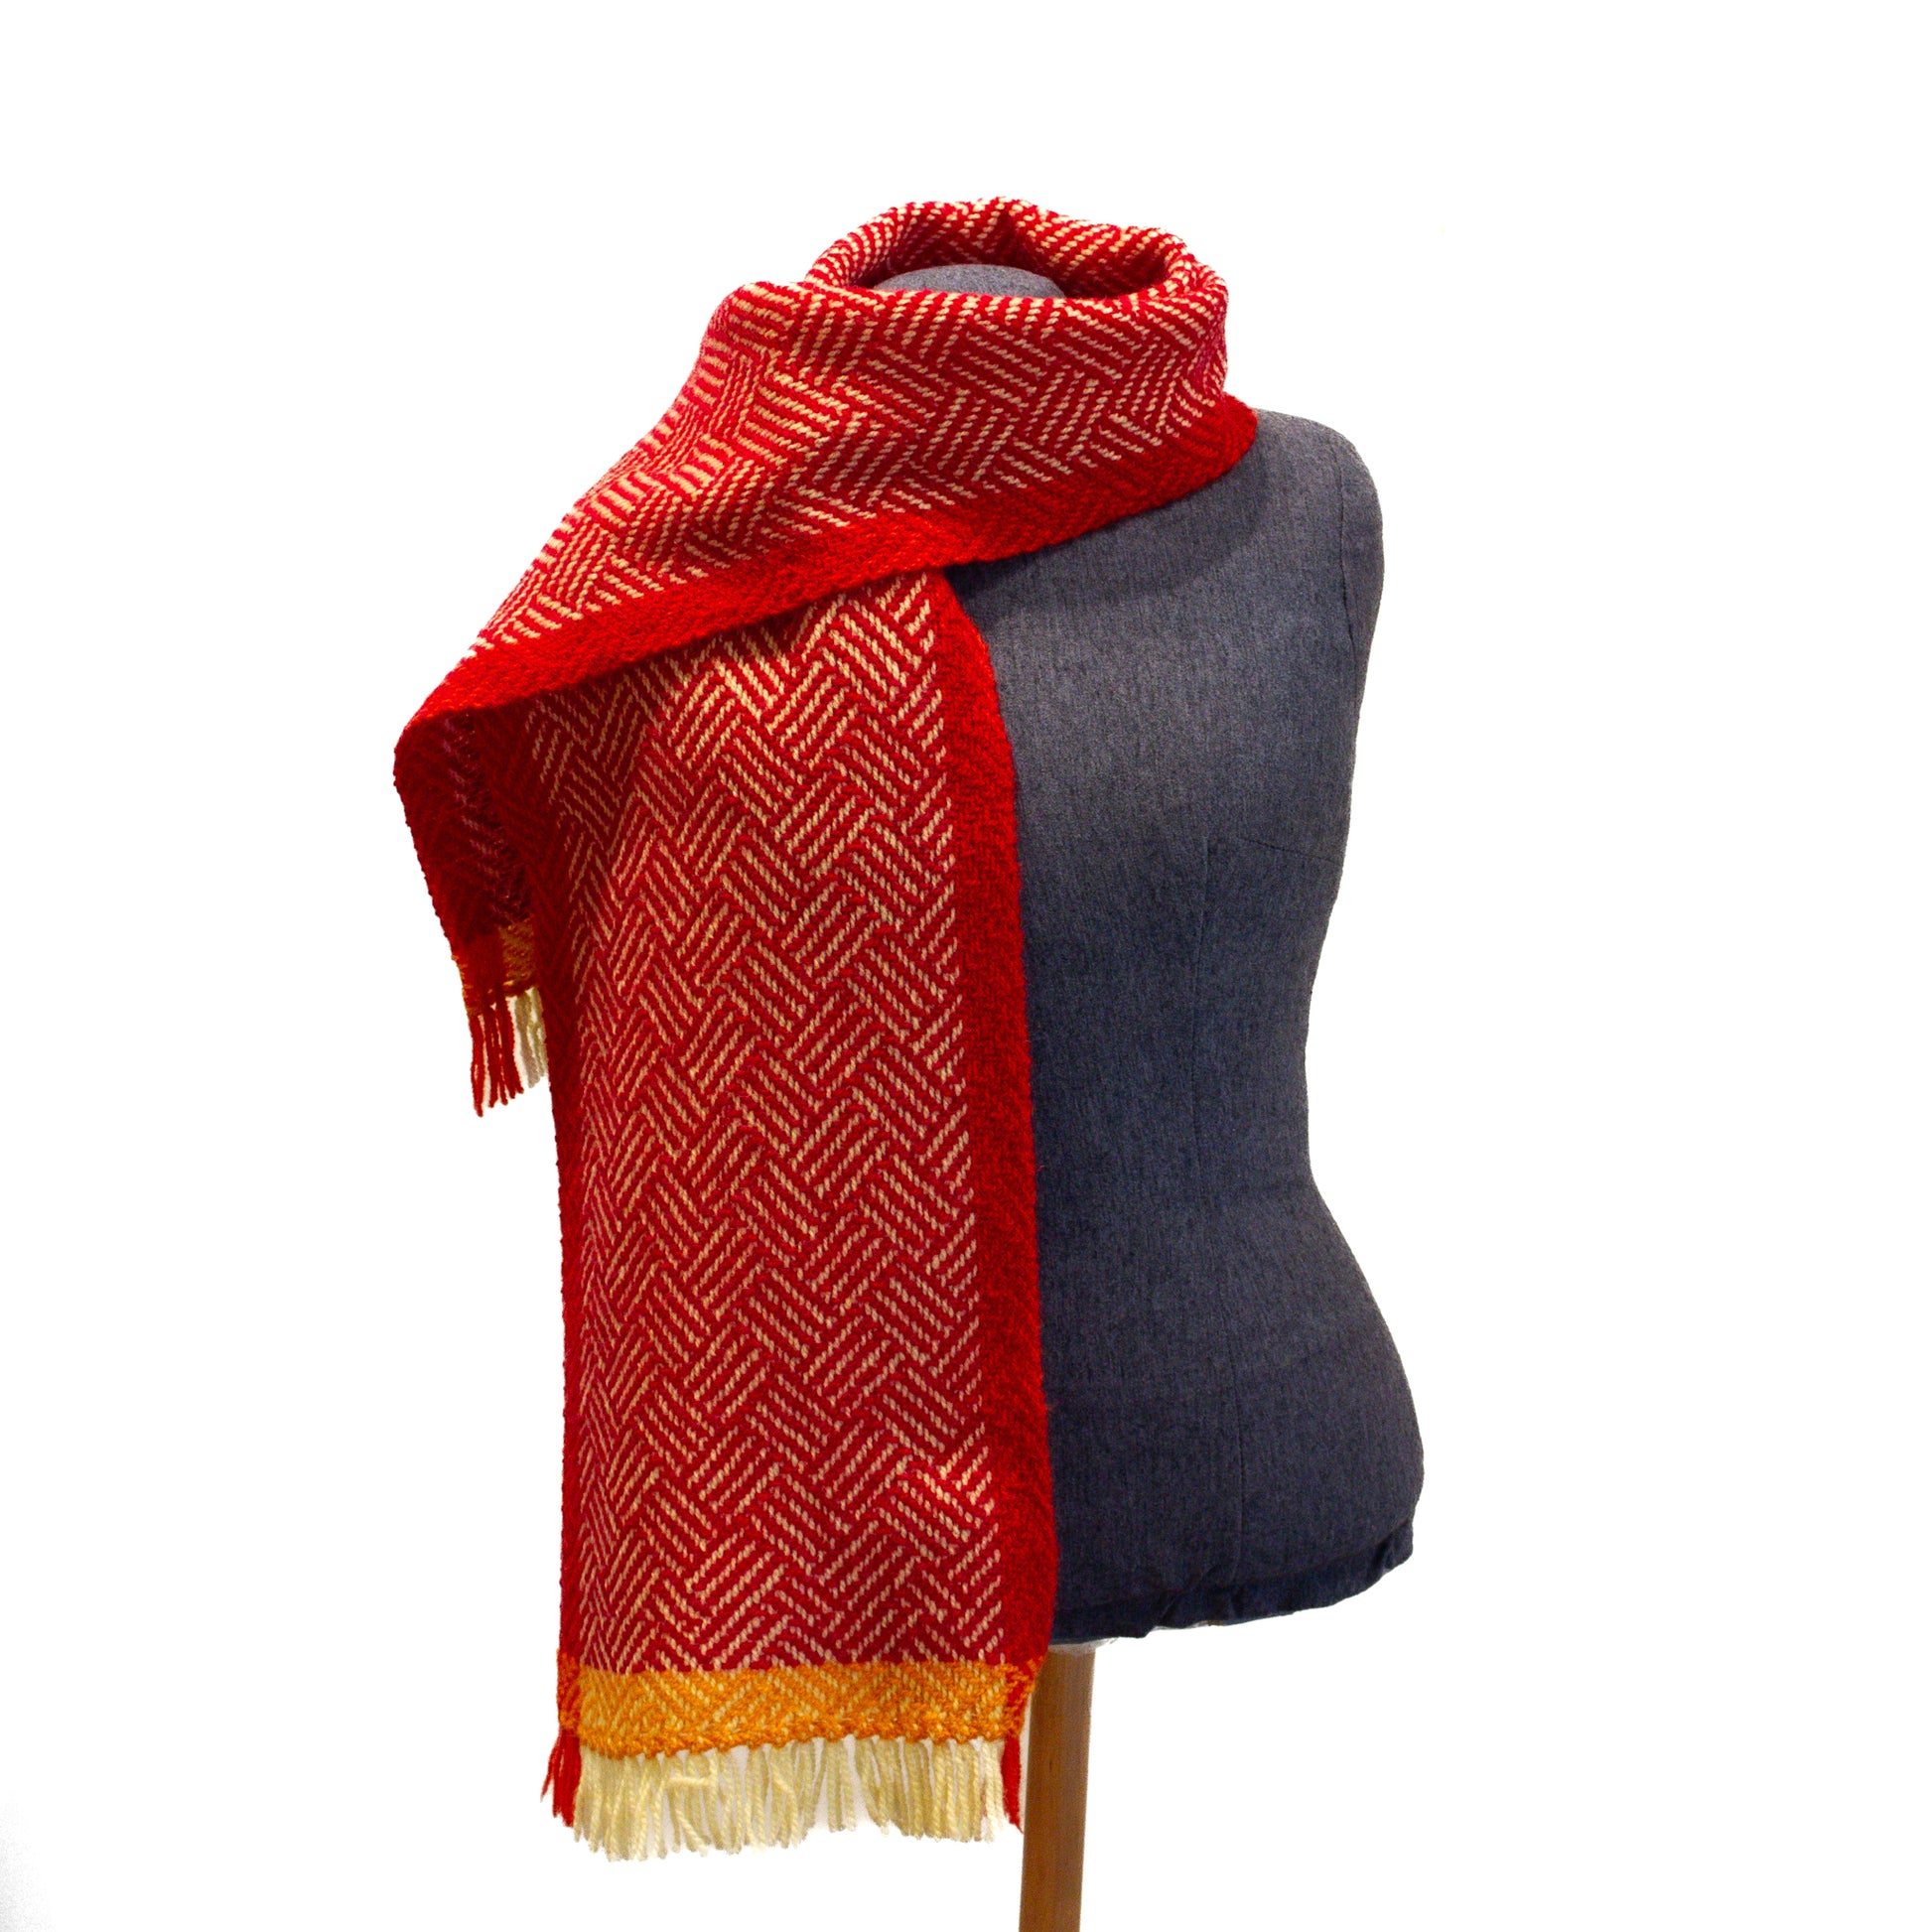 Red and yellow scarf